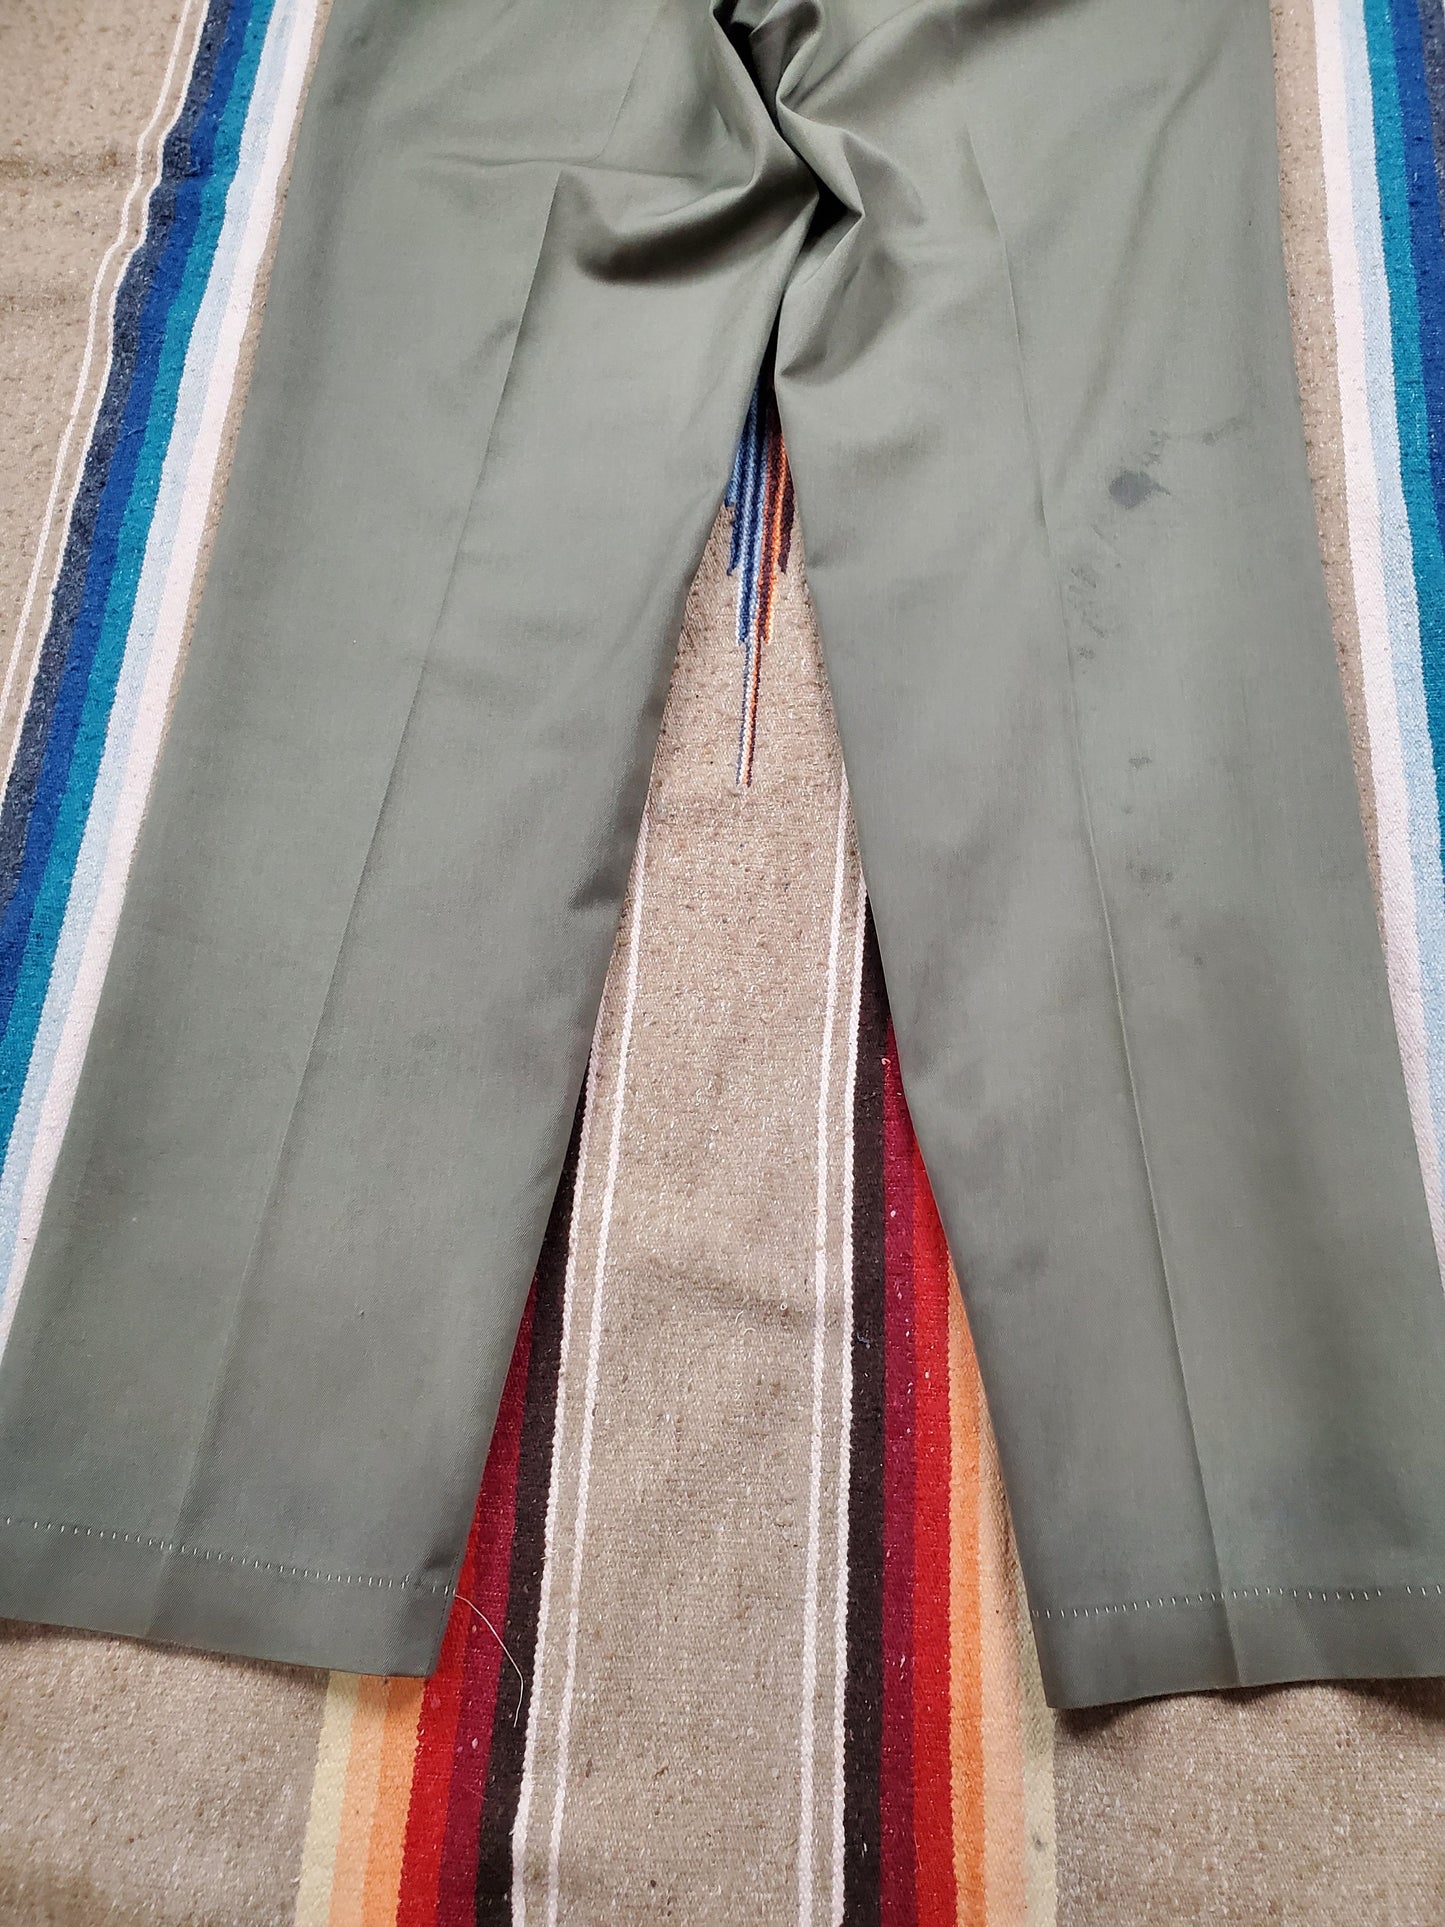 1970s Lee Leesures Lee Prest Permanent Press Pants Made in USA Size 30x30